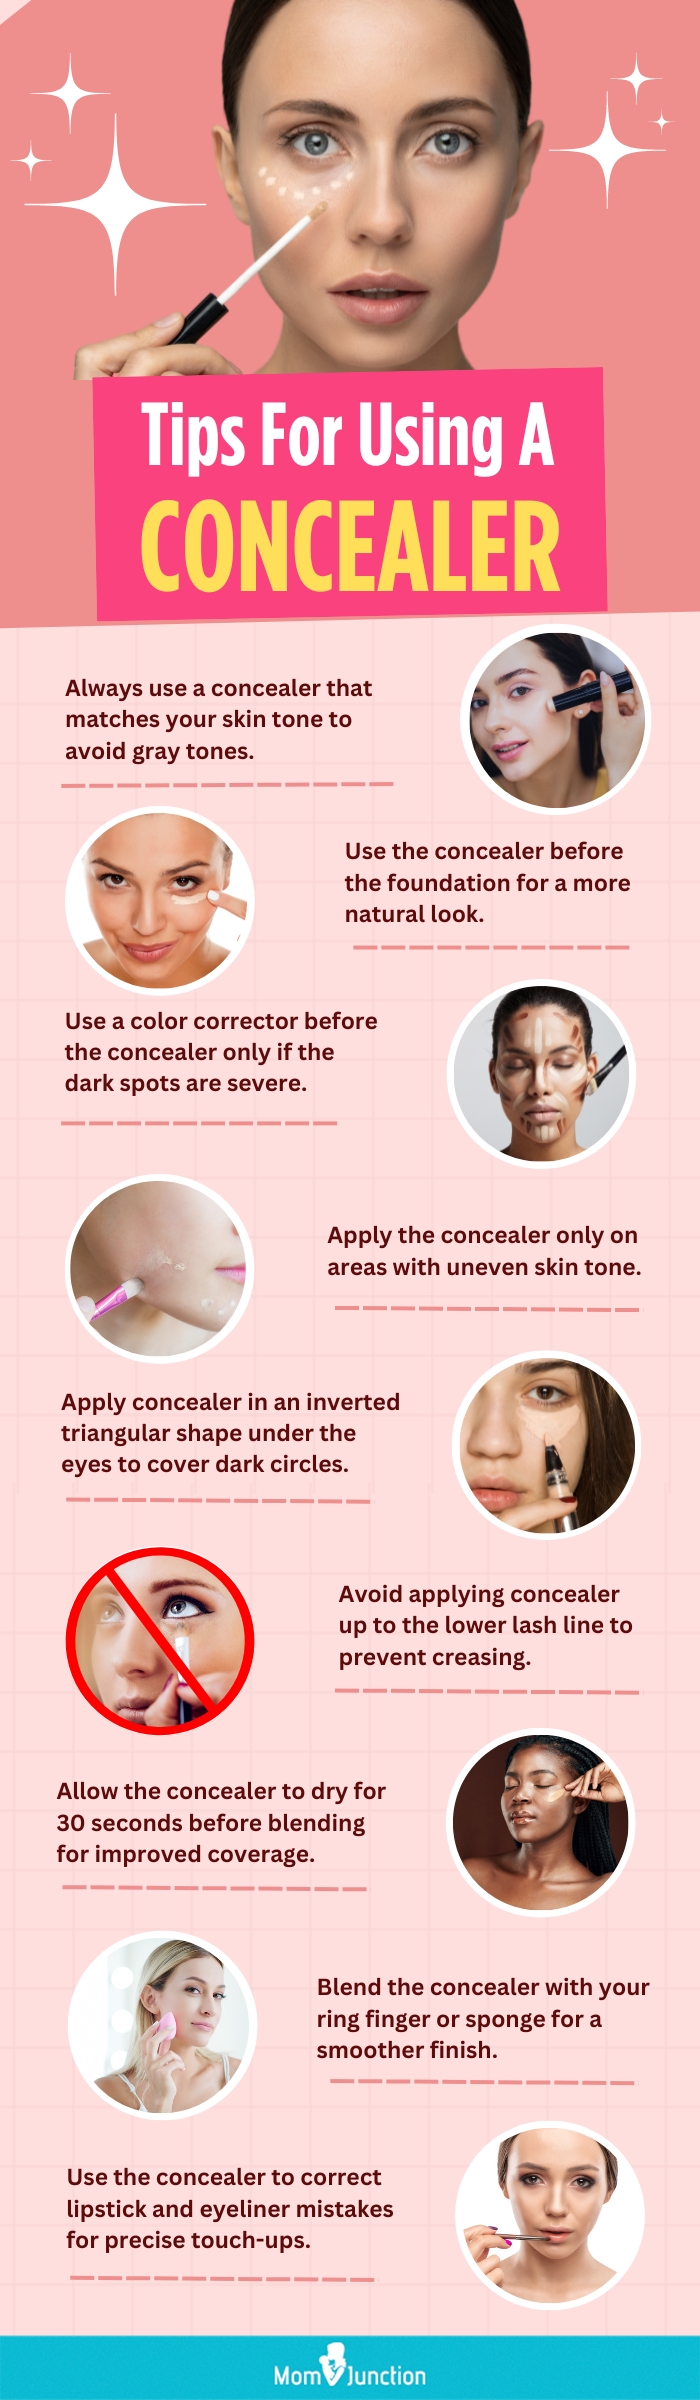 Tips On How To Use A Concealer (infographic)